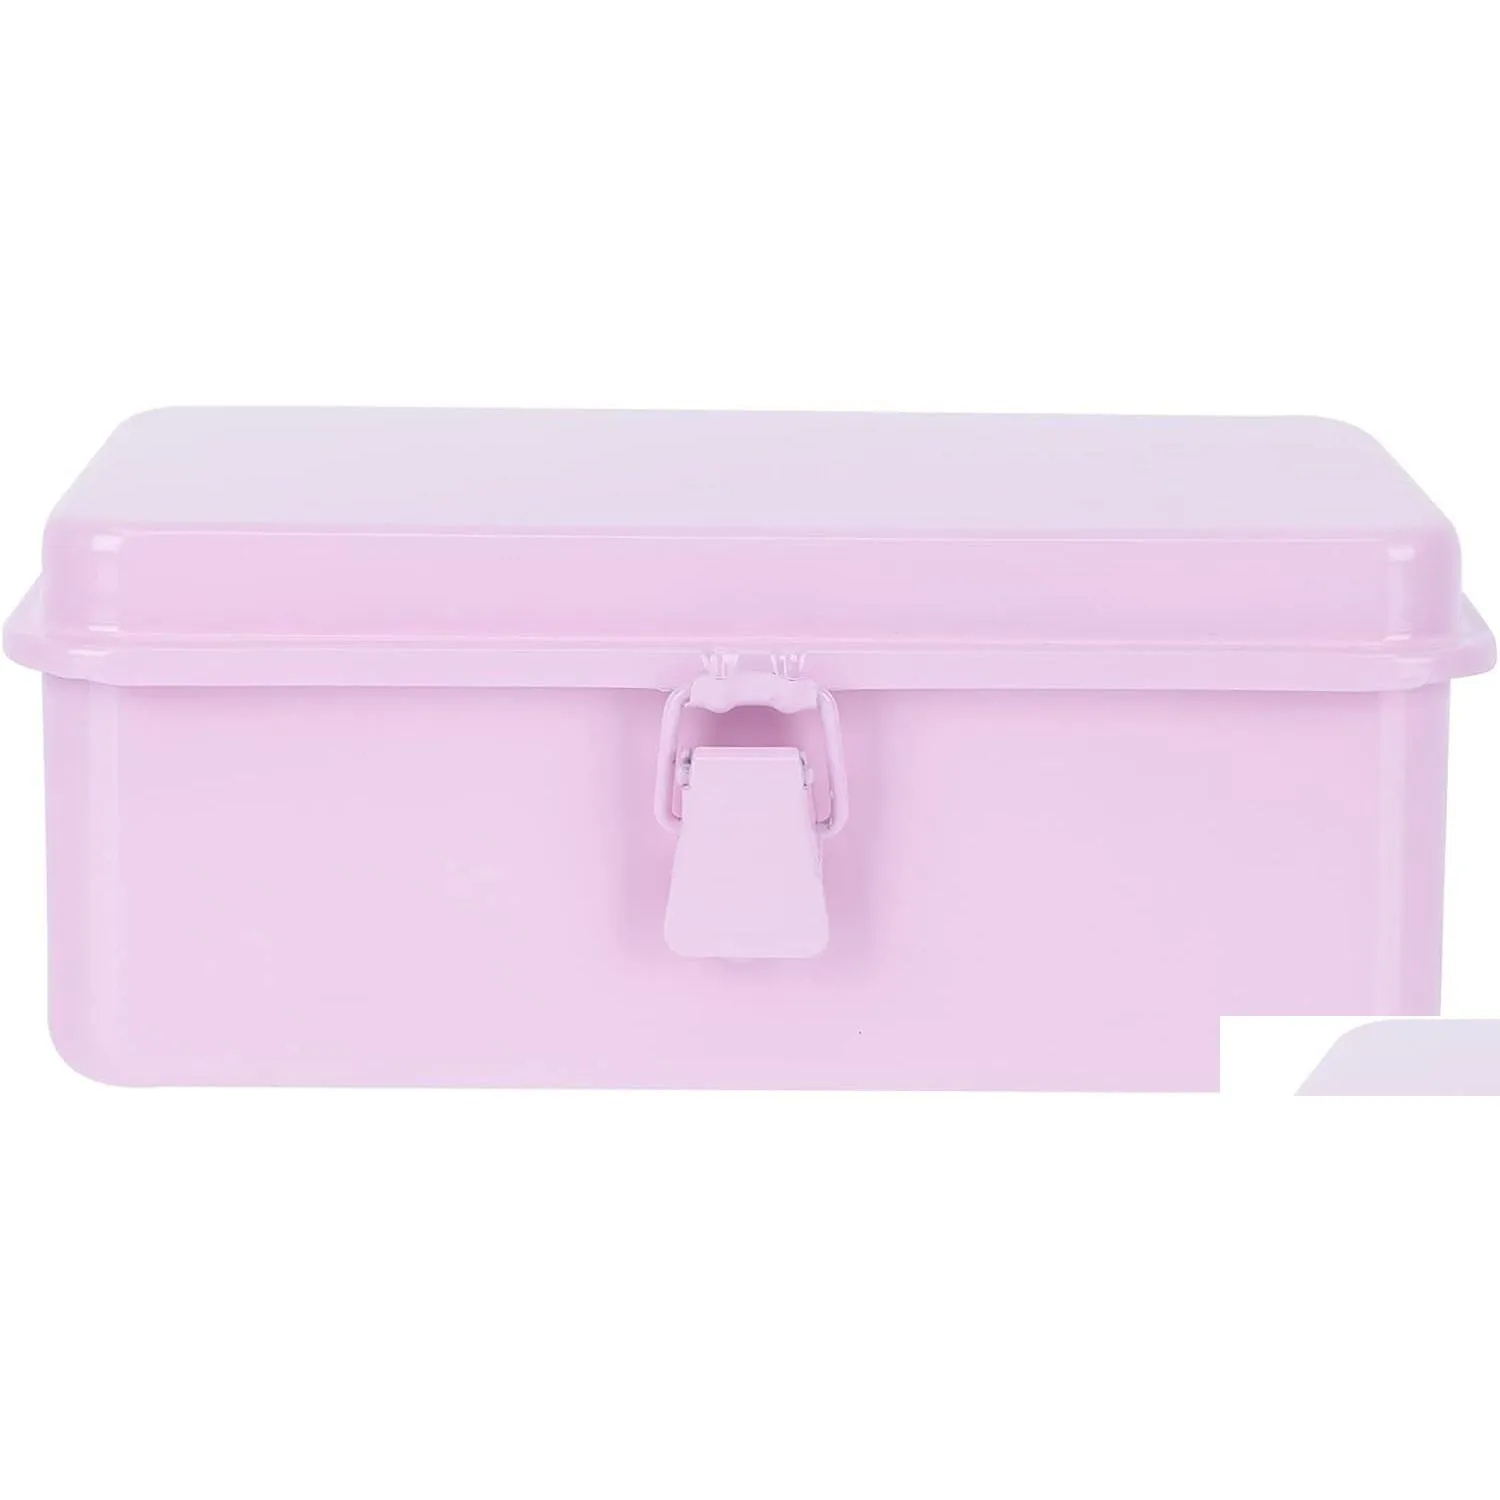 Other Household Sundries 1Pc Box Snack Metal Nesting Tins Der Storage Rack Trash Simple Holder Container Hinge Tray Mini Hinges Rec Dr Otkjt